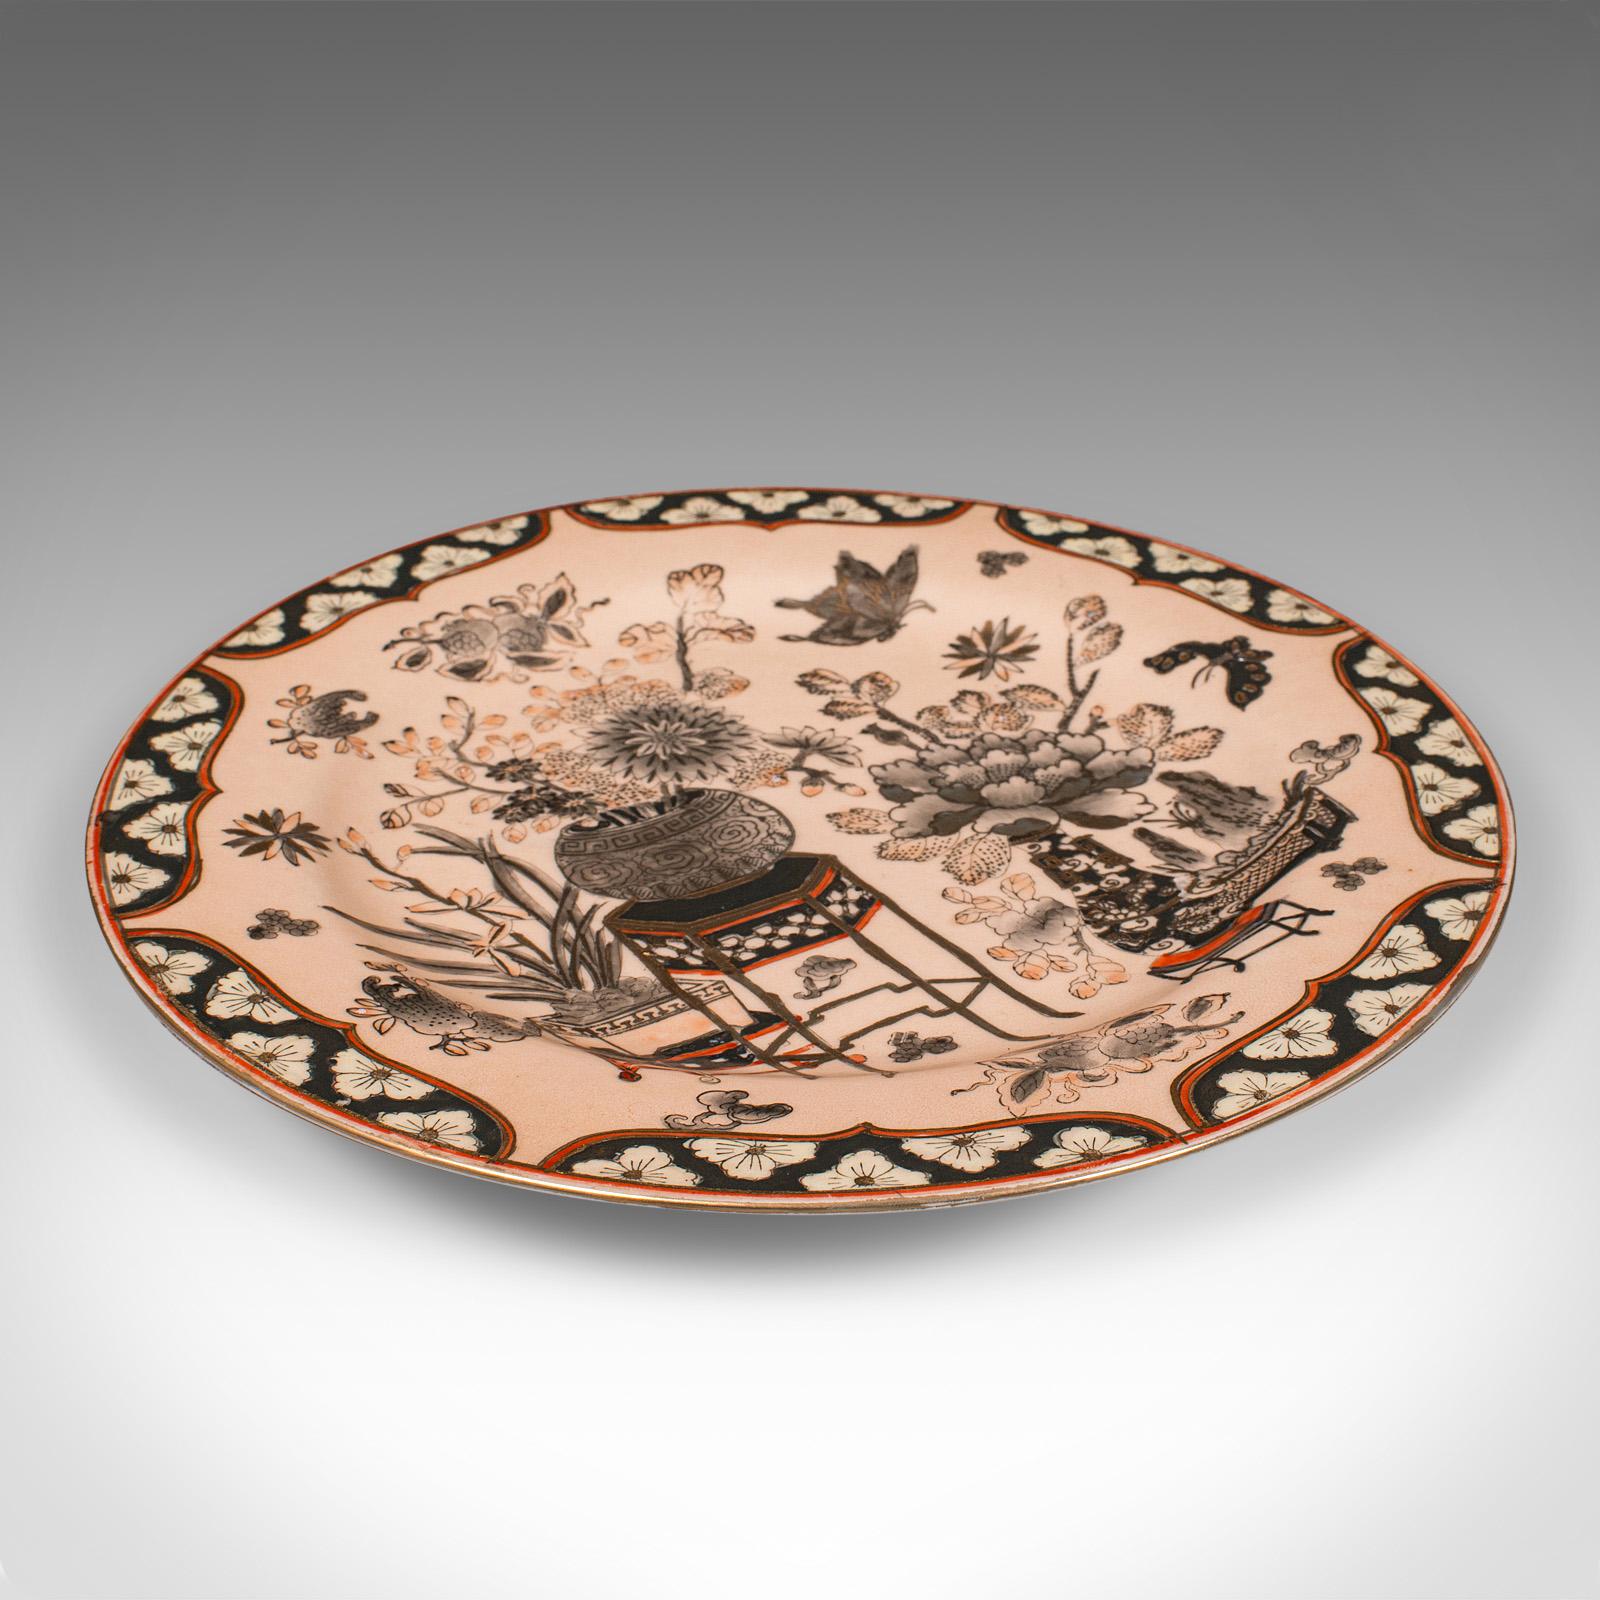 Vintage Decorative Charger, Chinese, Ceramic, Display Plate, Art Deco, C.1940 For Sale 5